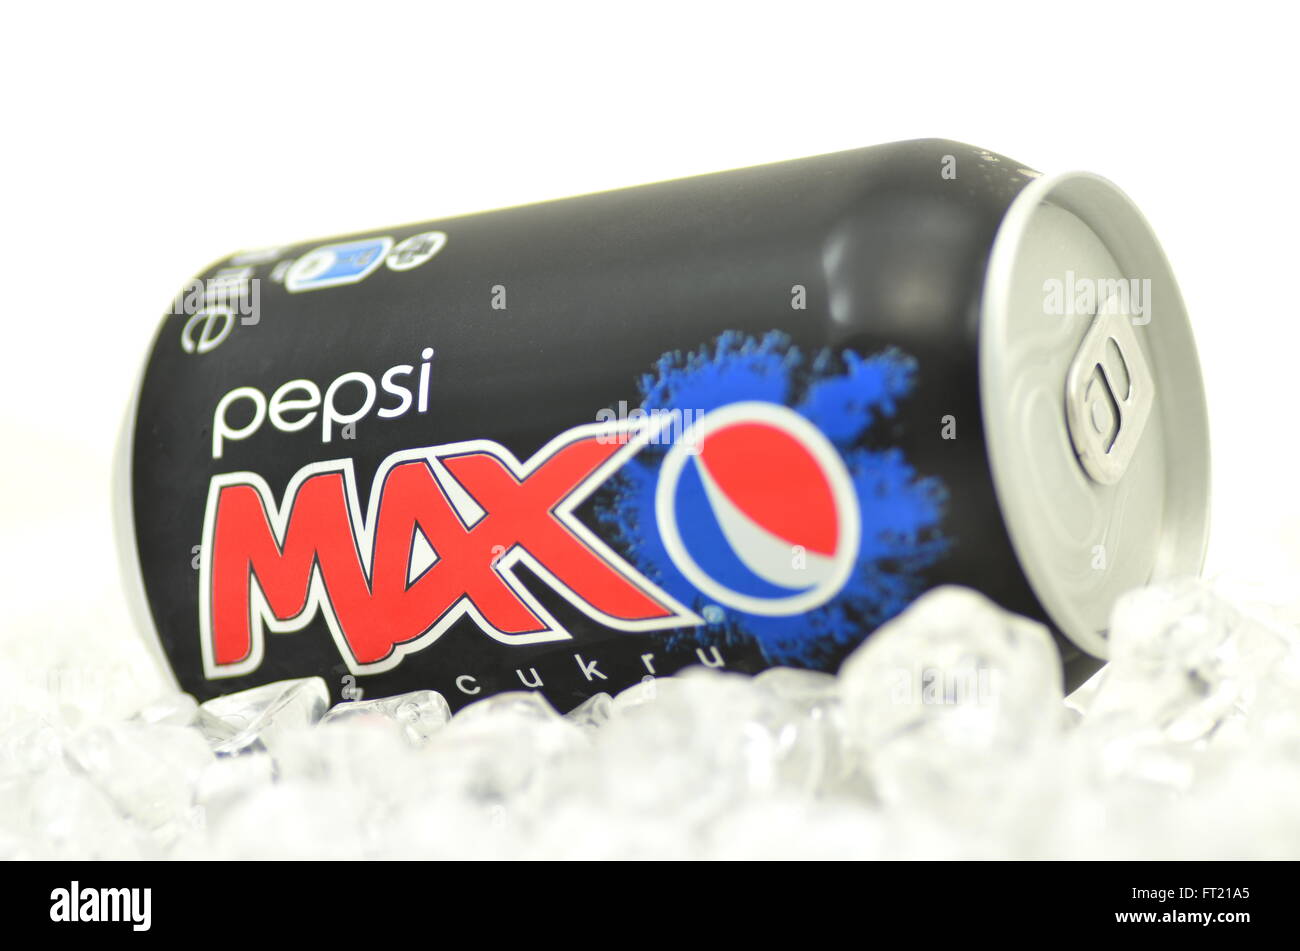 Can of Pepsi Max drink on ice Stock Photo